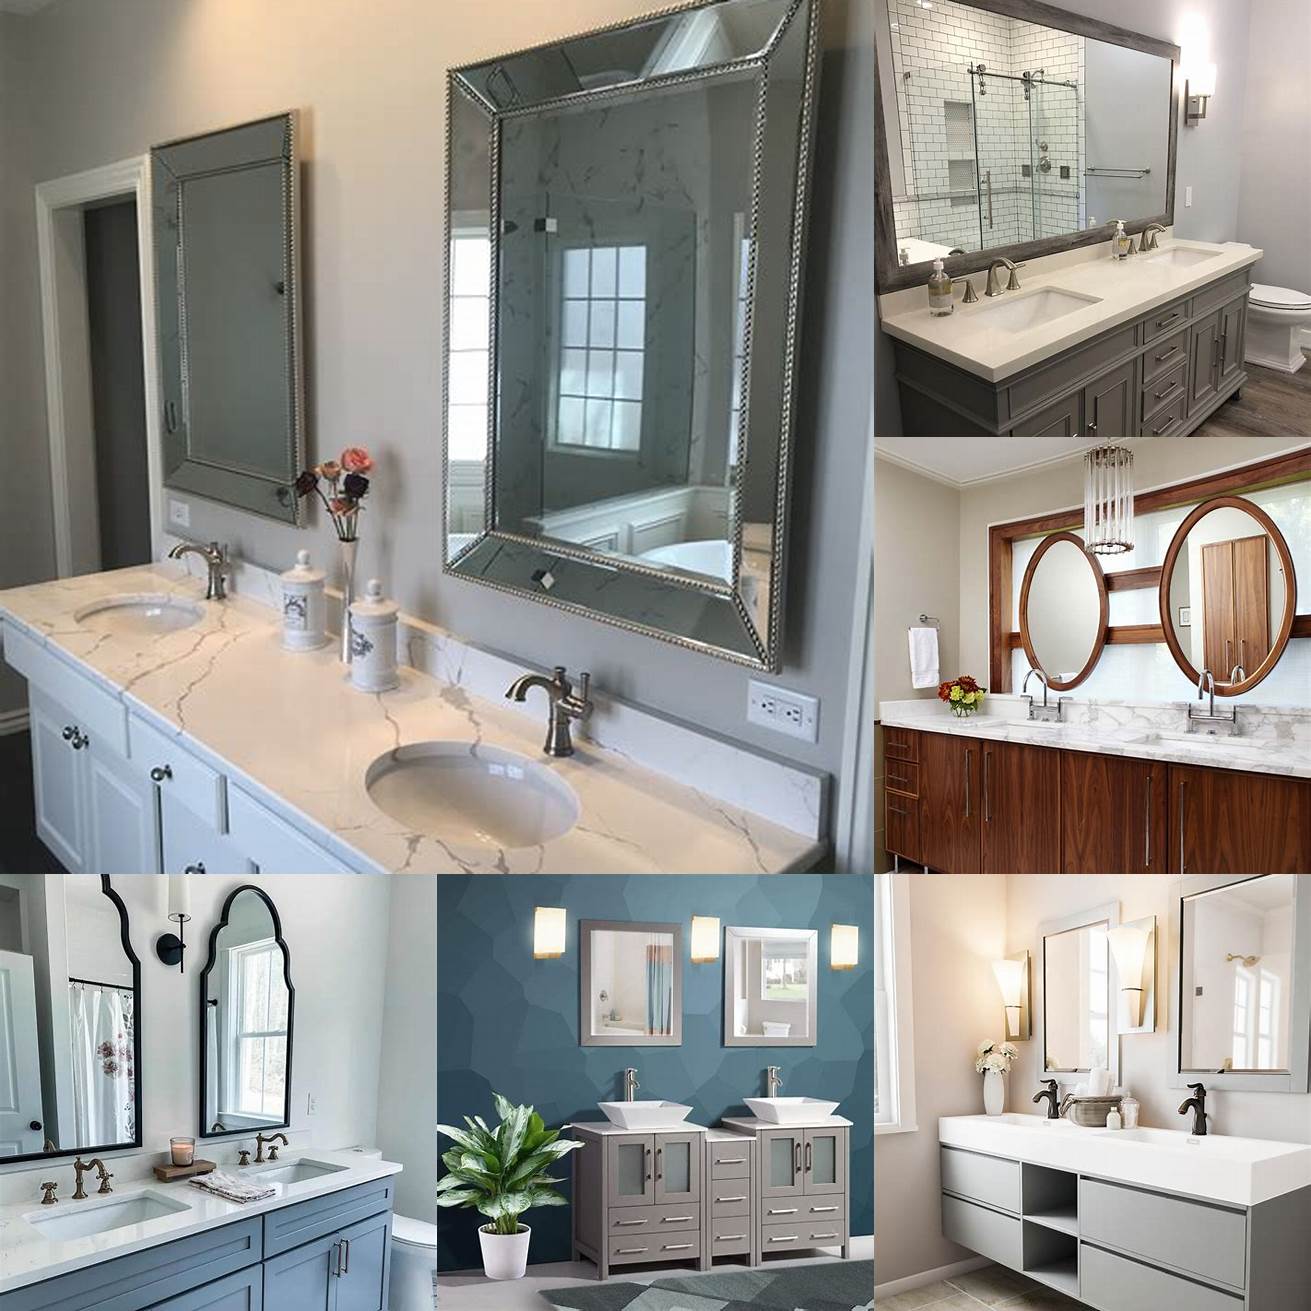 Functionality A double vanity is not only practical but also adds an elegant touch to your bathroom